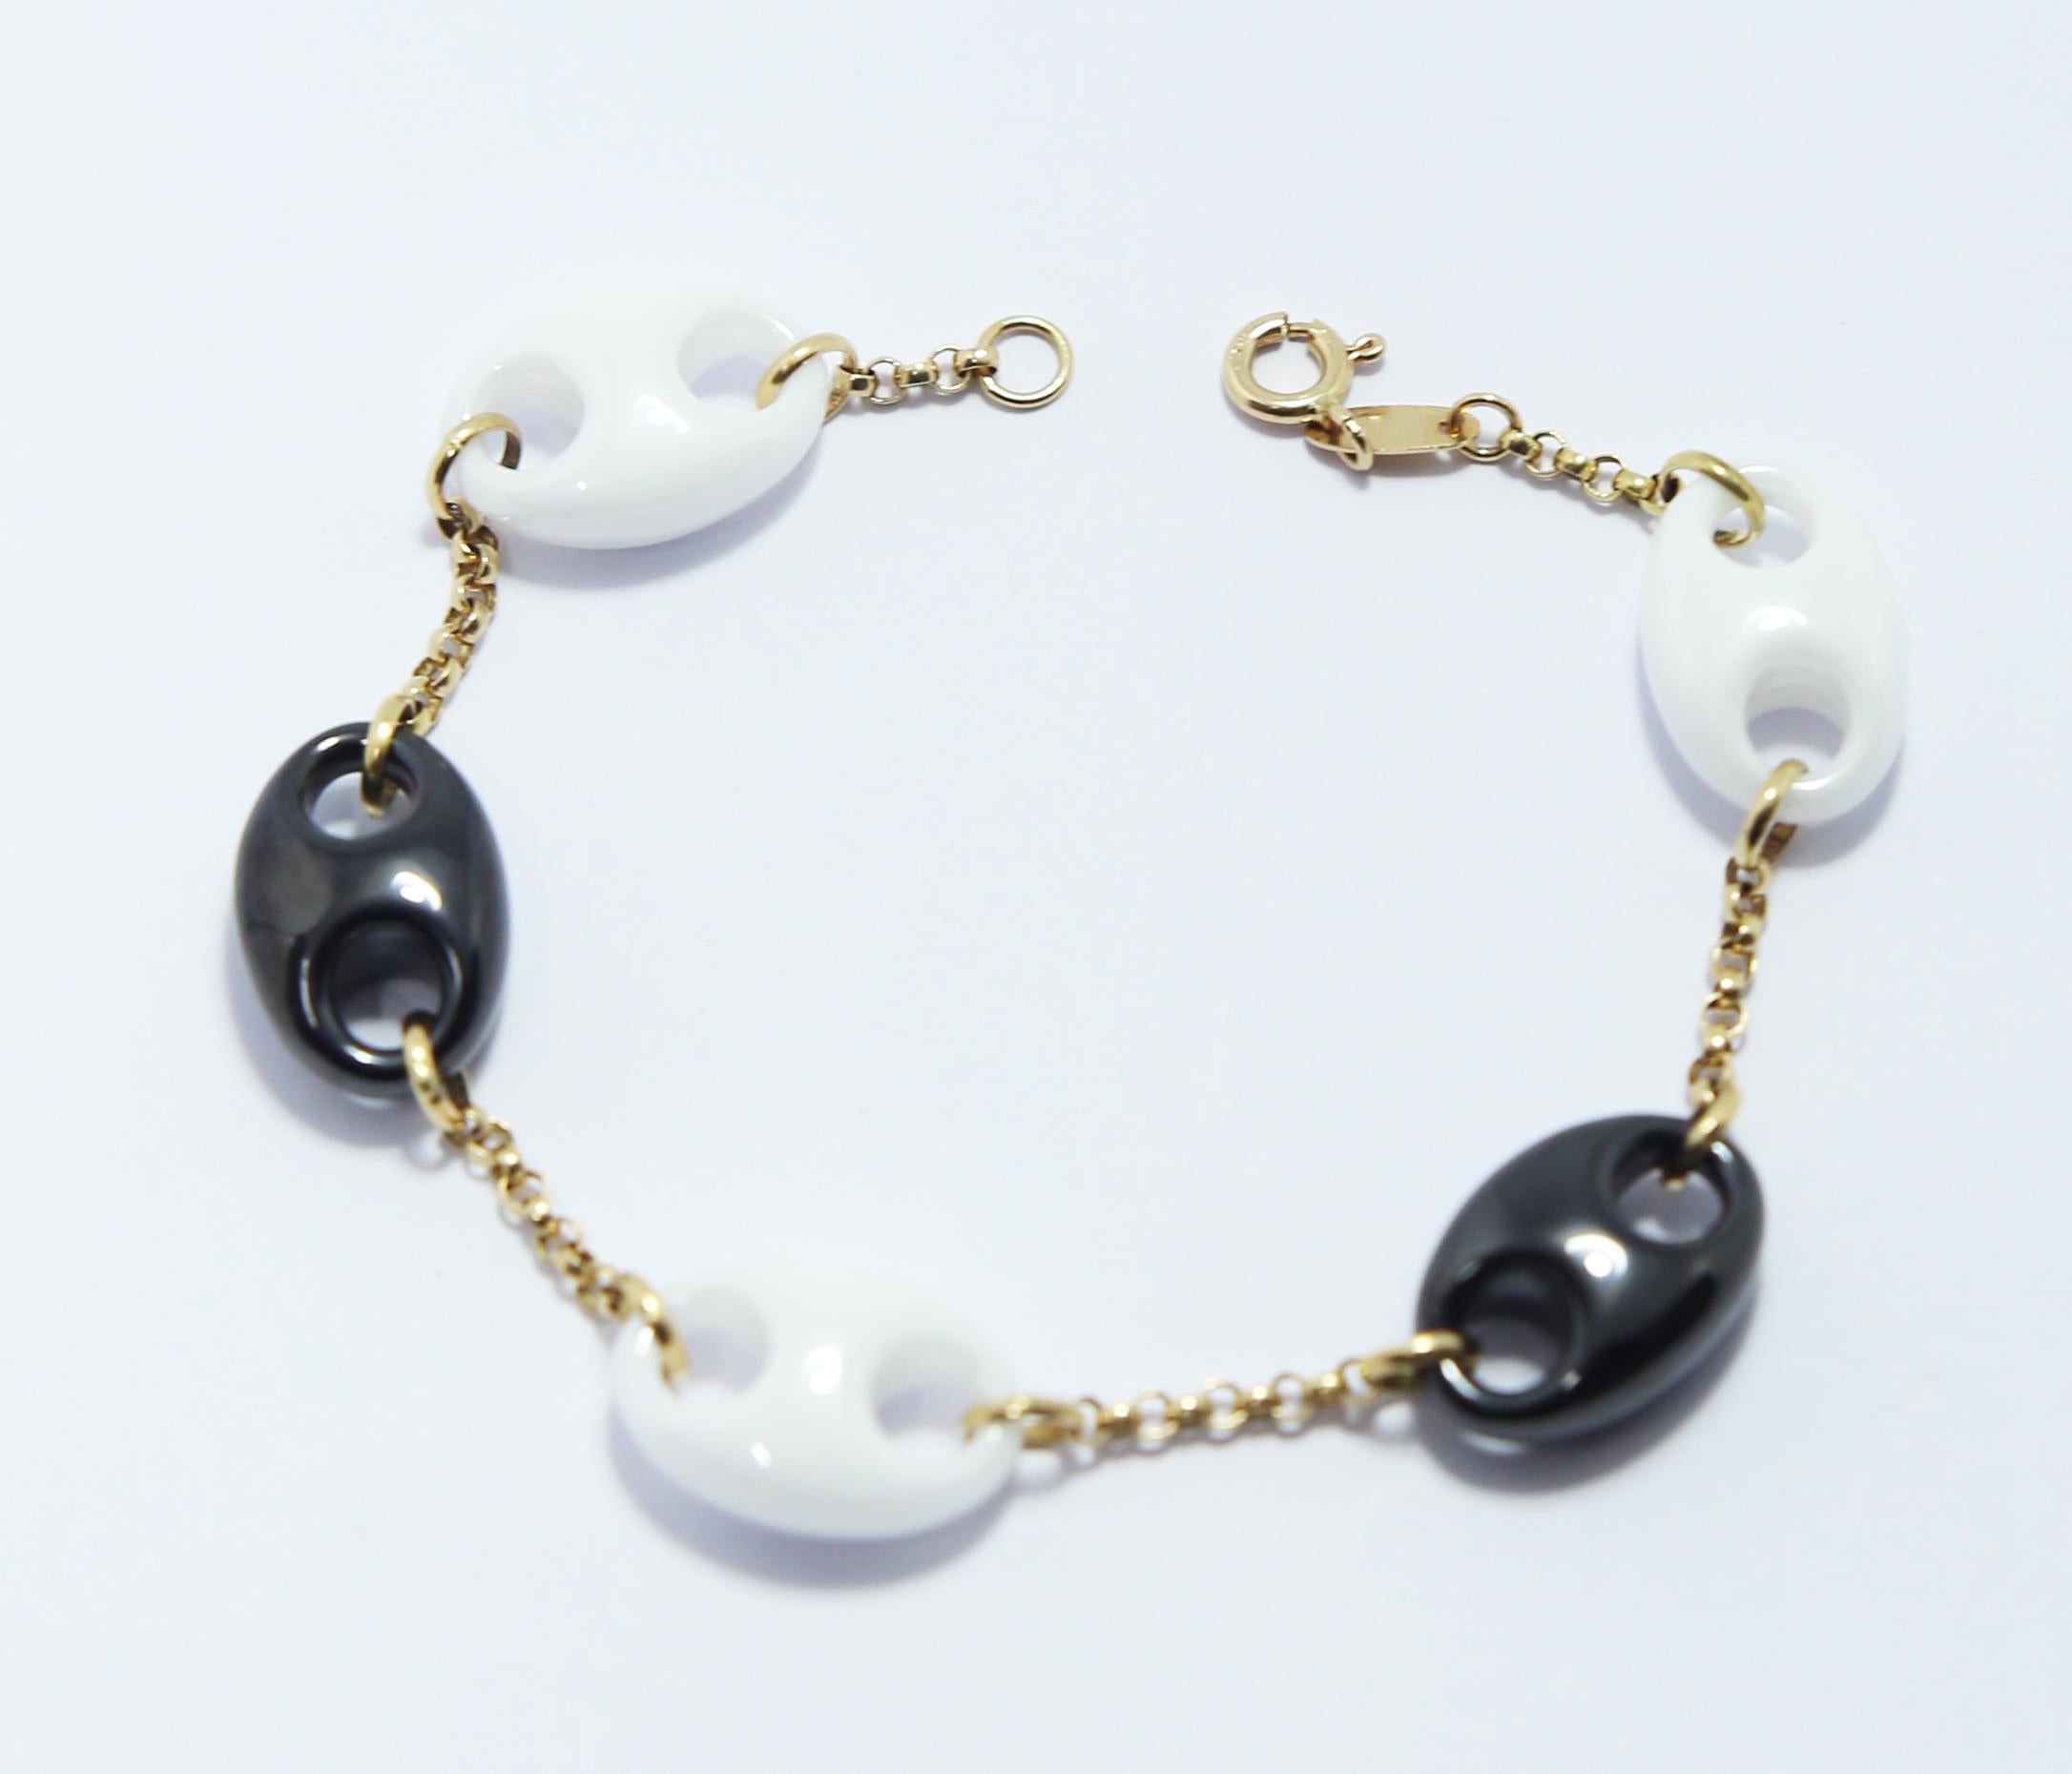 Nautical Anchor Link Bracelet 18k Yellow Gold Chain, Black and White Porcelain 1